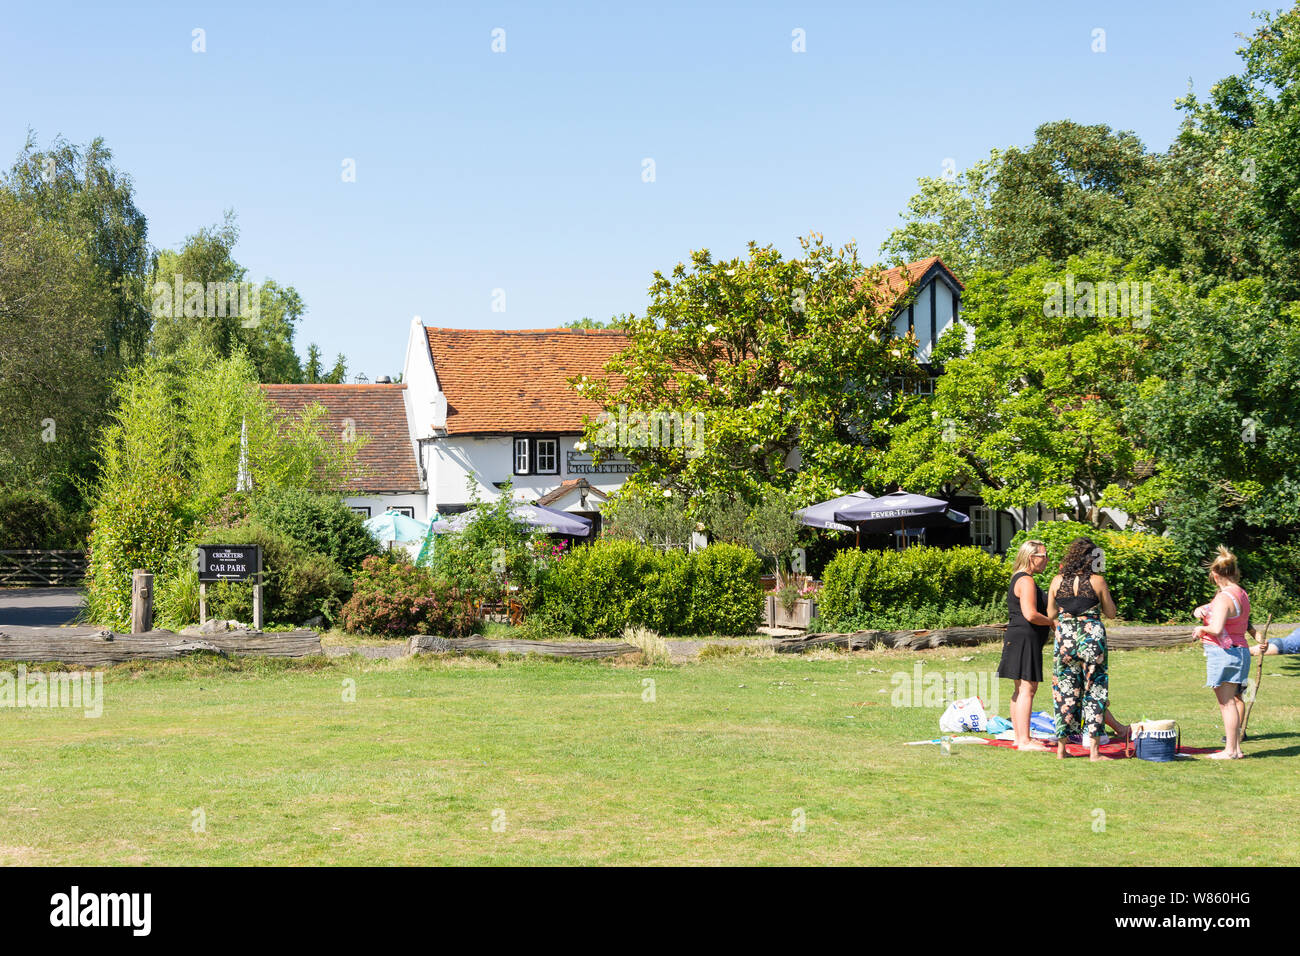 The Cricketers Pub Brasserie from Downside Common, Downside, Surrey, England, United Kingdom Stock Photo